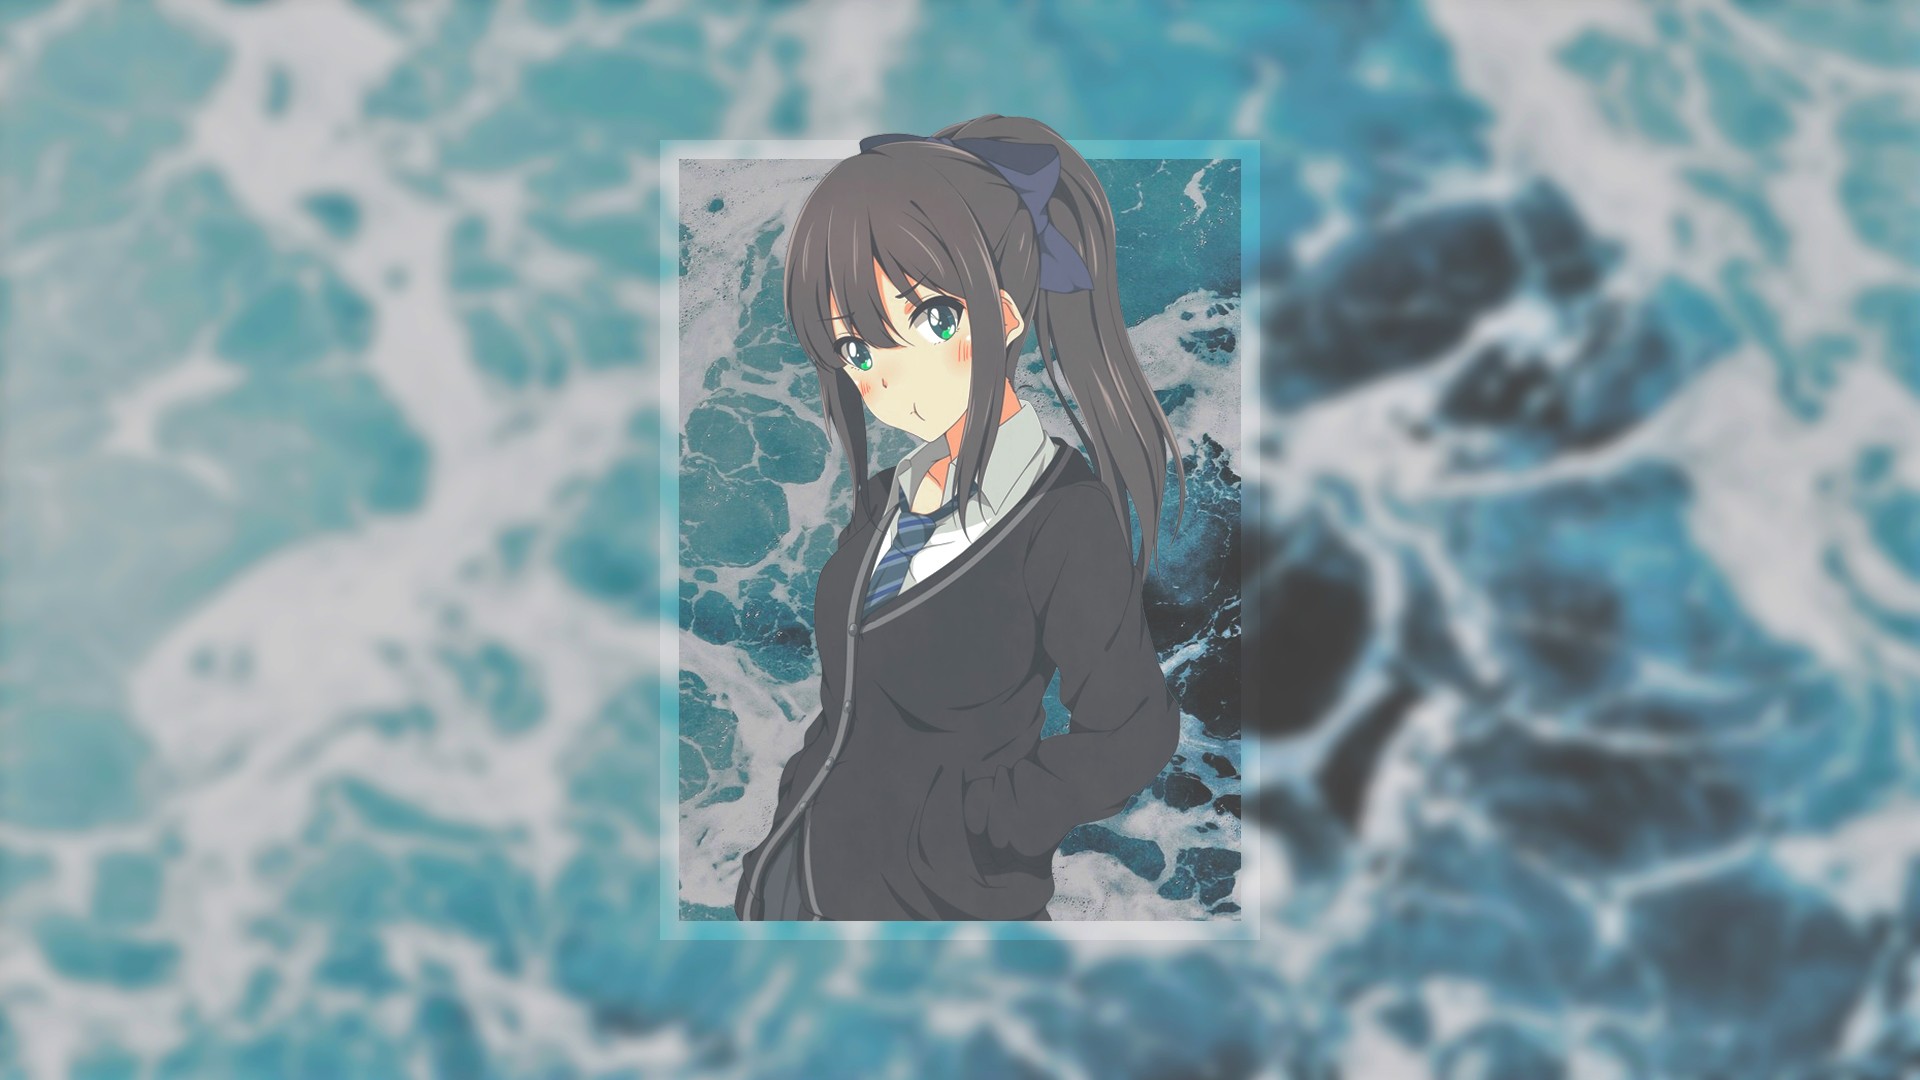 Anime 1920x1080 picture-in-picture tie anime girls anime dark hair green eyes Shibuya Rin